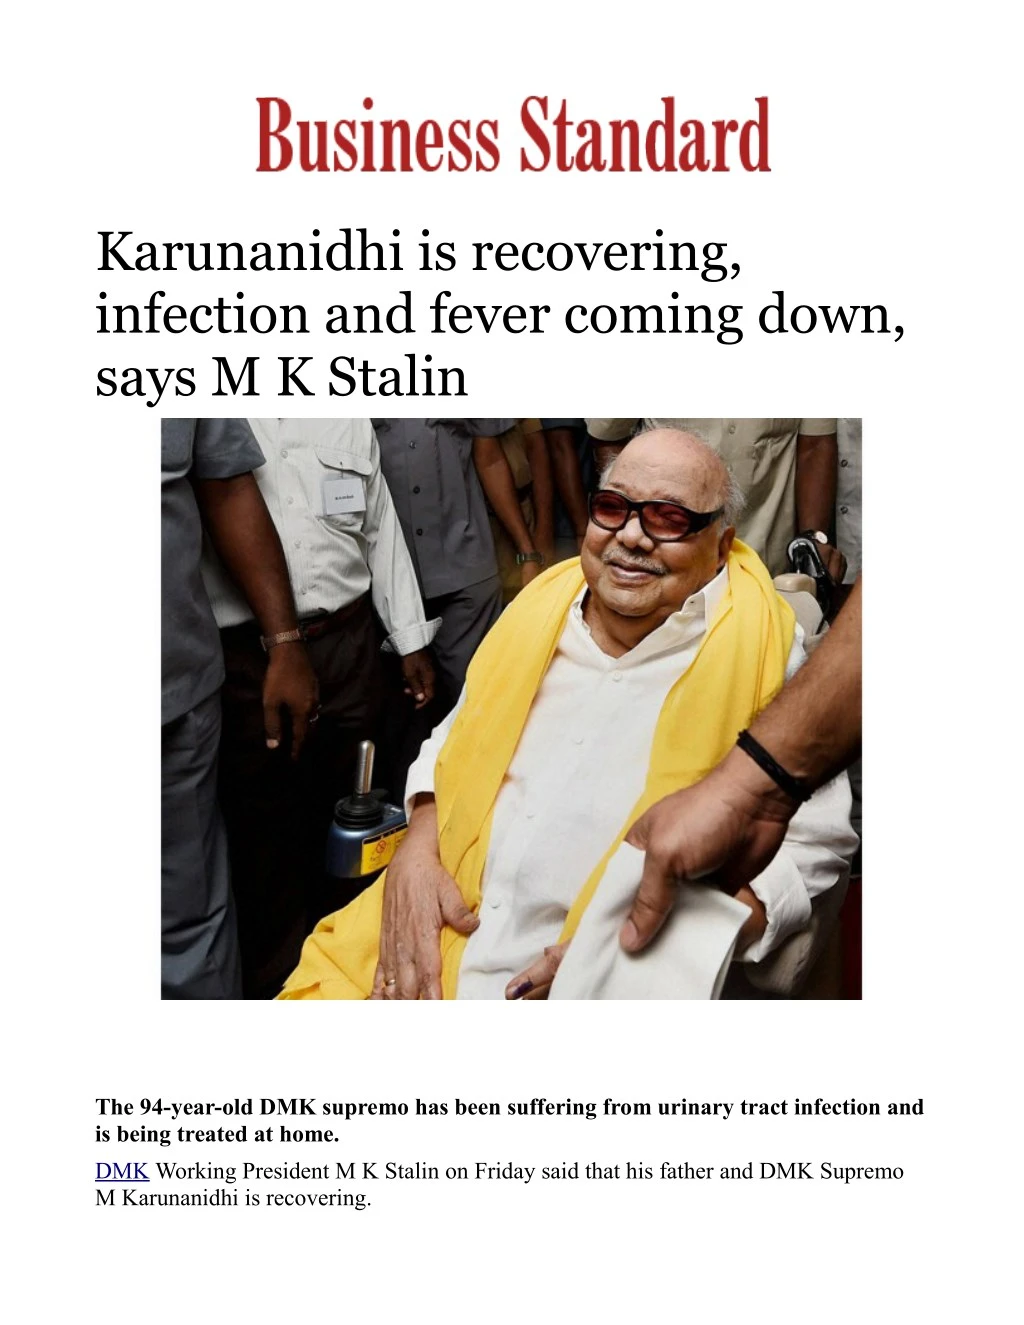 karunanidhi is recovering infection and fever